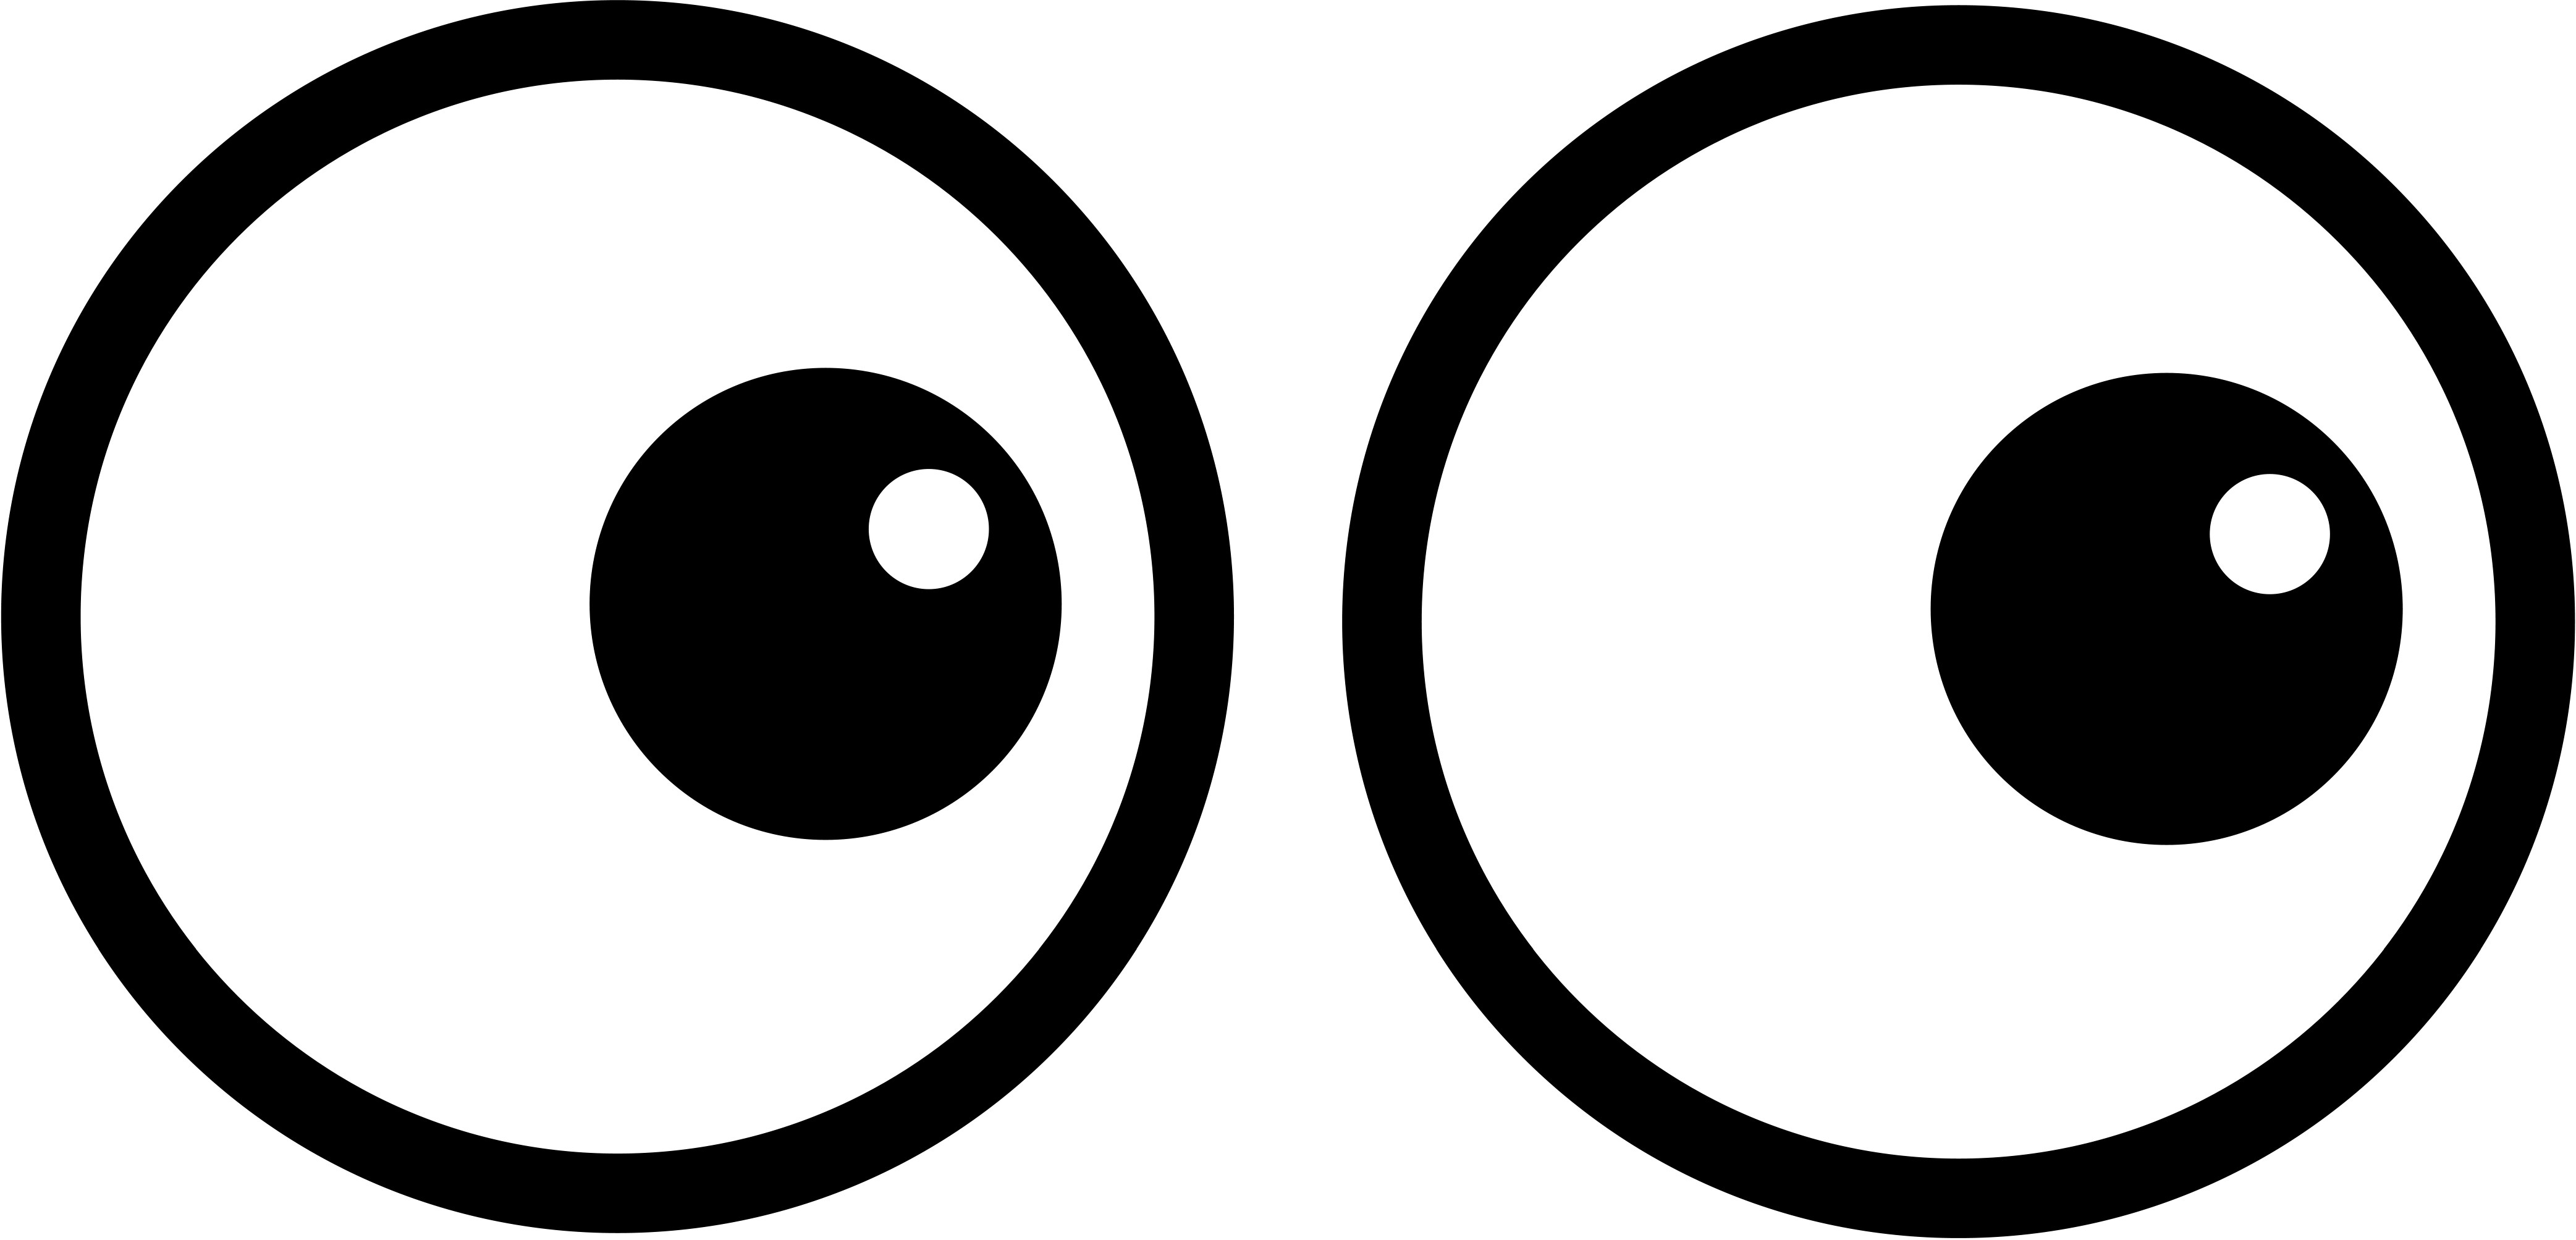 Googly eyes with lashes clipart